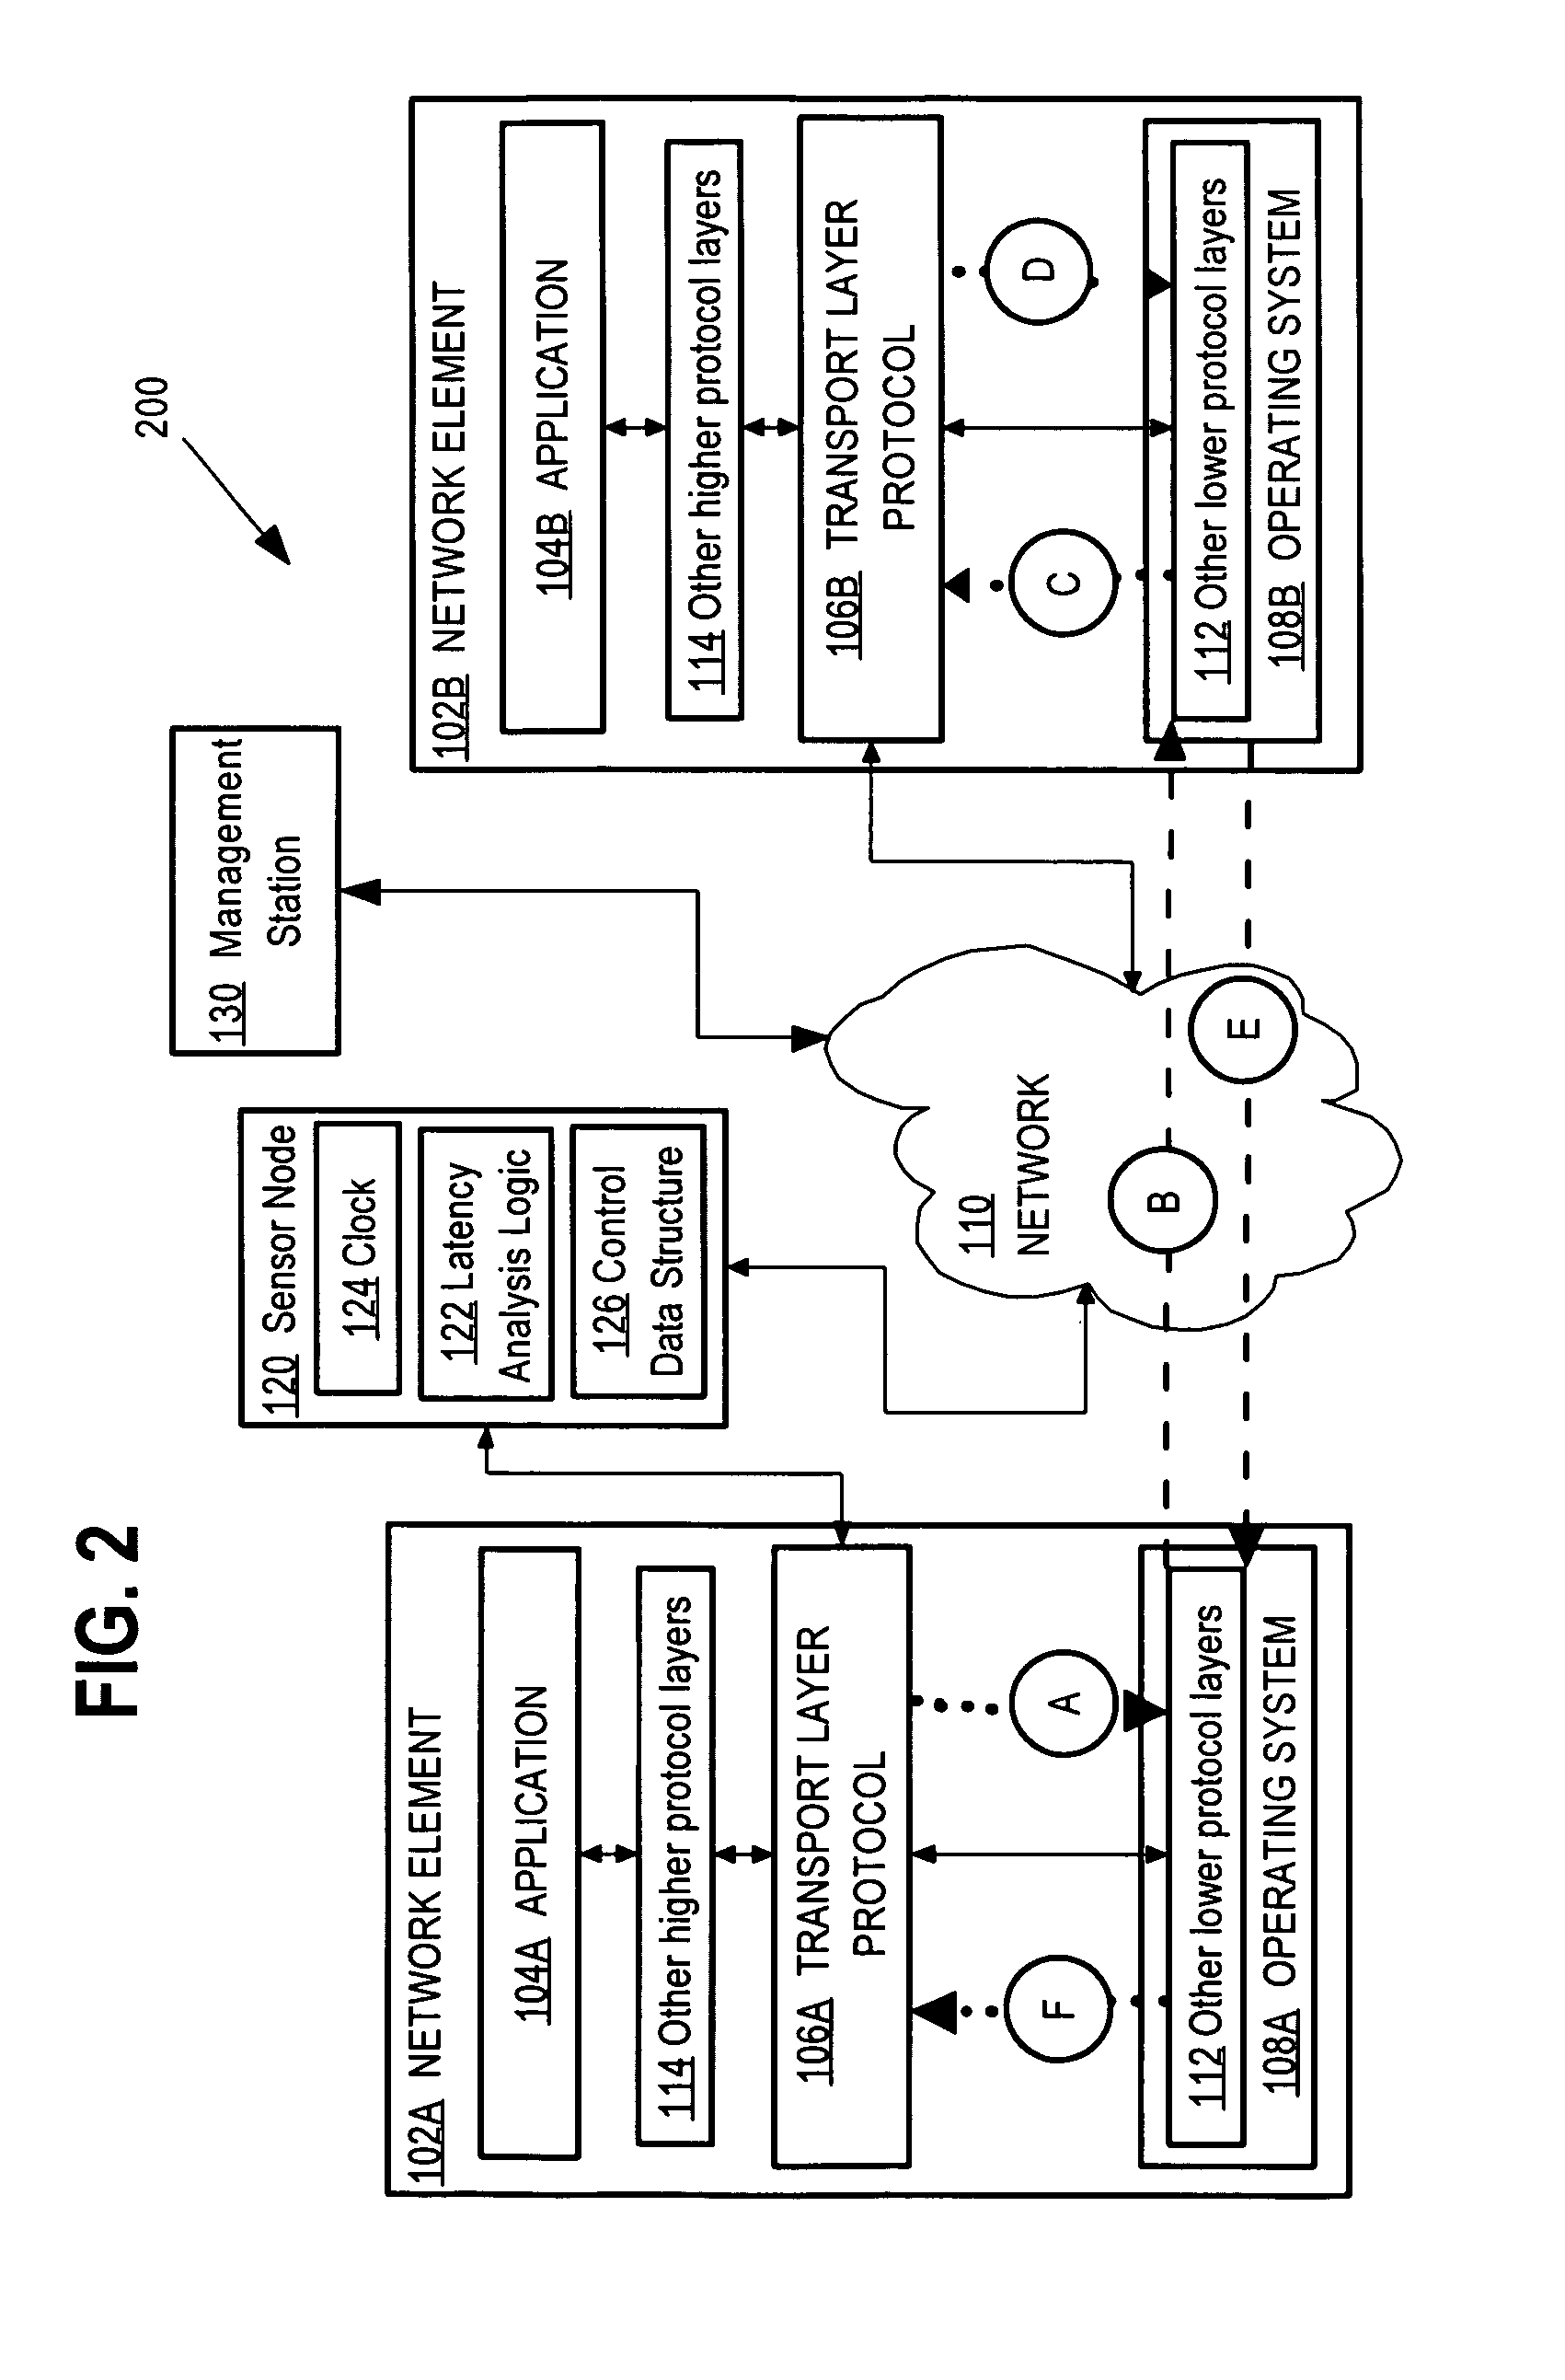 Network device that determines application-level network latency by monitoring option values in a transport layer message